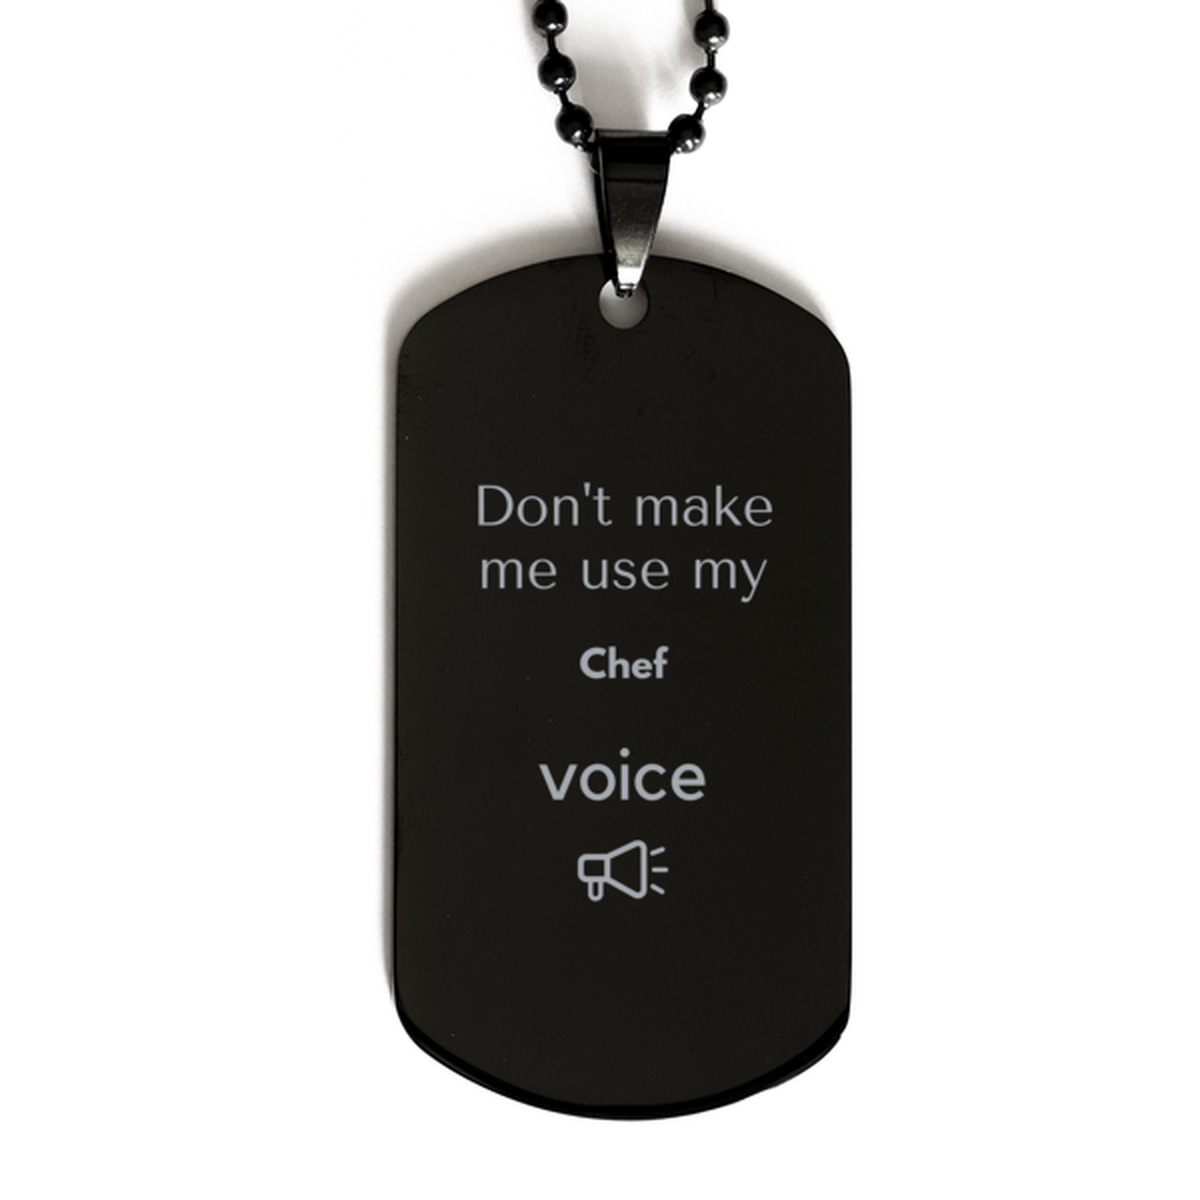 Don't make me use my Chef voice, Sarcasm Chef Gifts, Christmas Chef Black Dog Tag Birthday Unique Gifts For Chef Coworkers, Men, Women, Colleague, Friends